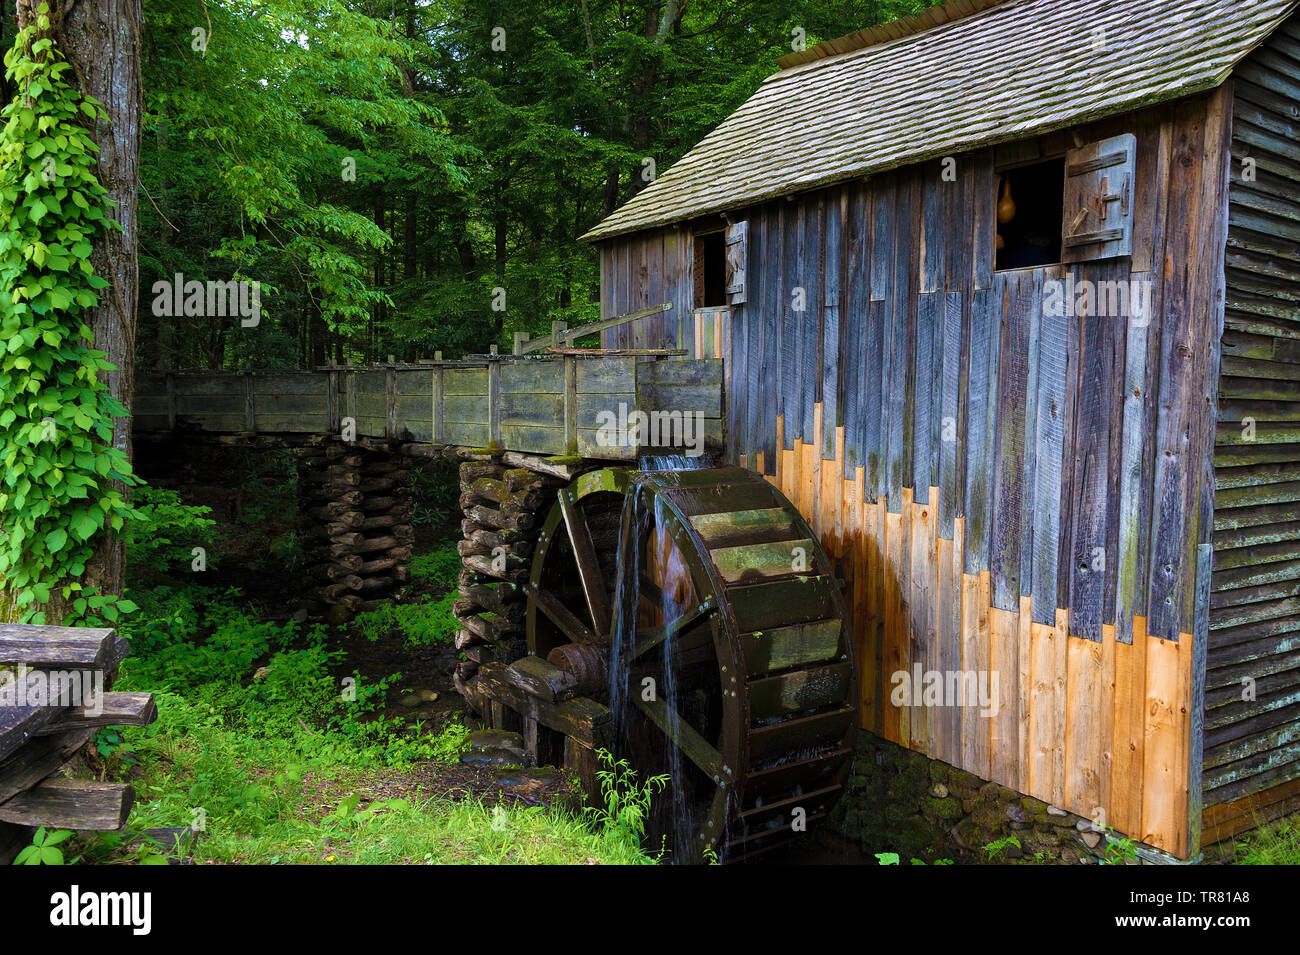 John P. Cable Grist Mill built in the early 1870's in Cades Cove, in Tennessee's Great Smoky Mountains. Stock Photo